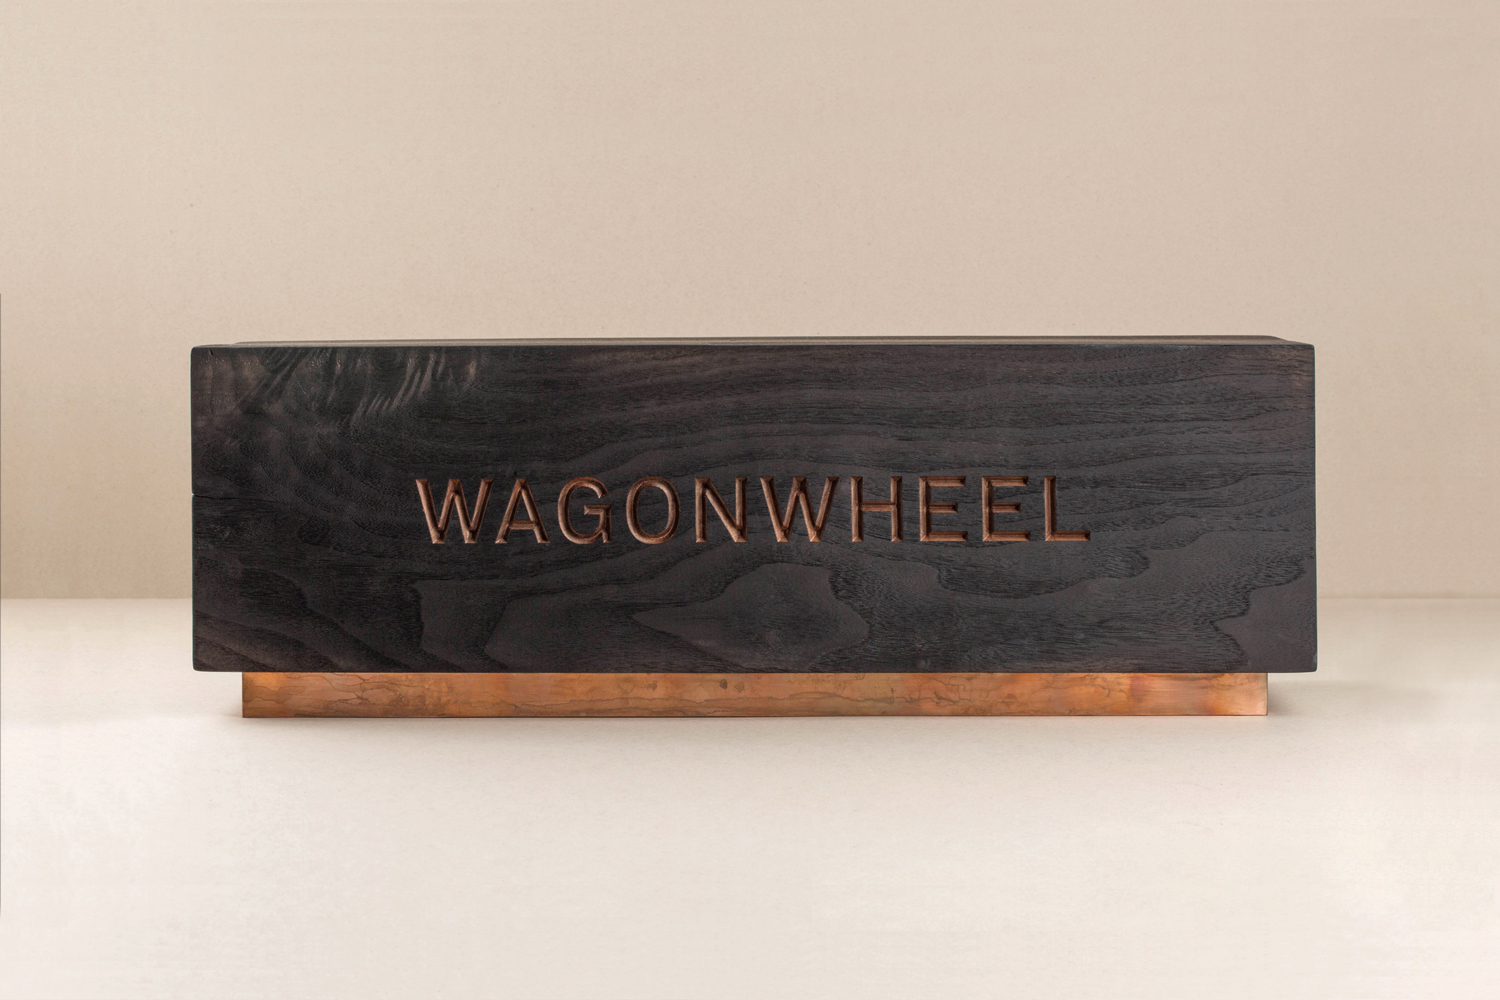 Brand identity and wood signage for Nashville-based boutique real estate title and escrow company Wagon Wheel designed by Perky Bros.